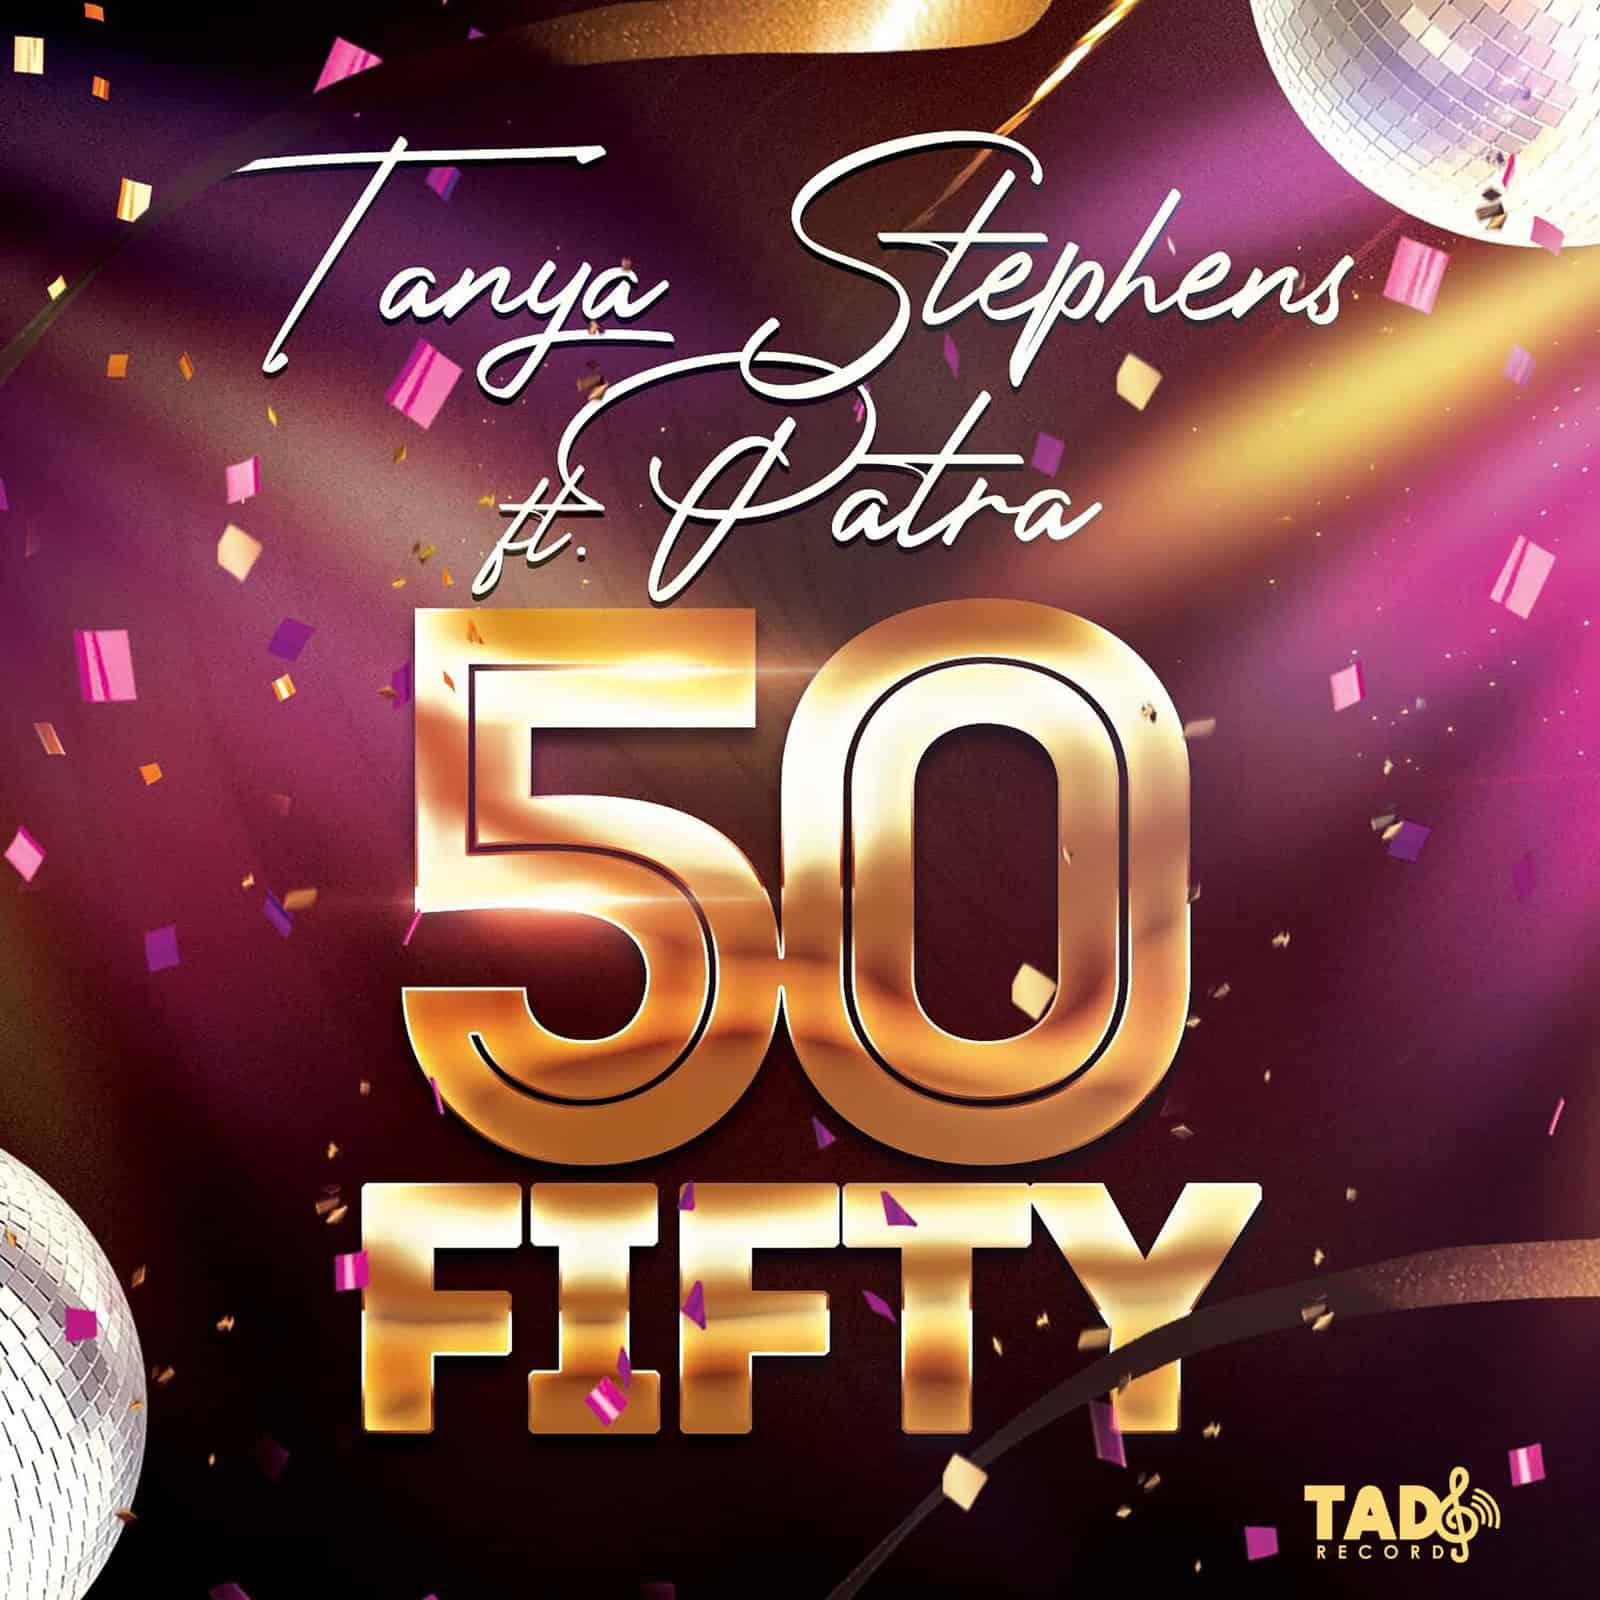 Tanya Stephens featuring Patra - FIFTY